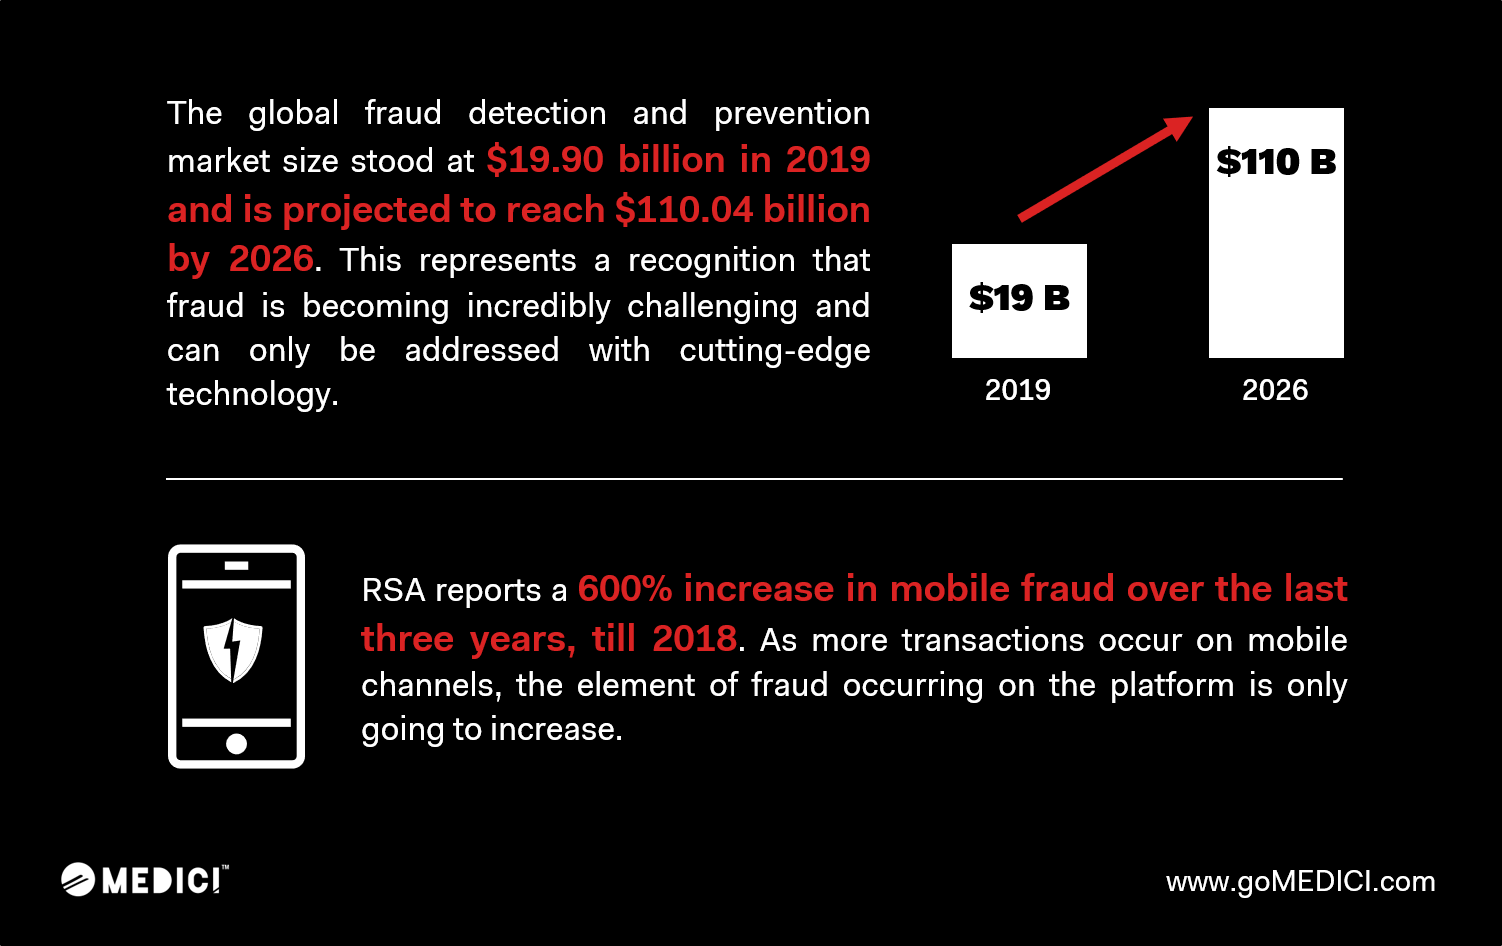 Medici - Global Fraud Detection and Prevention